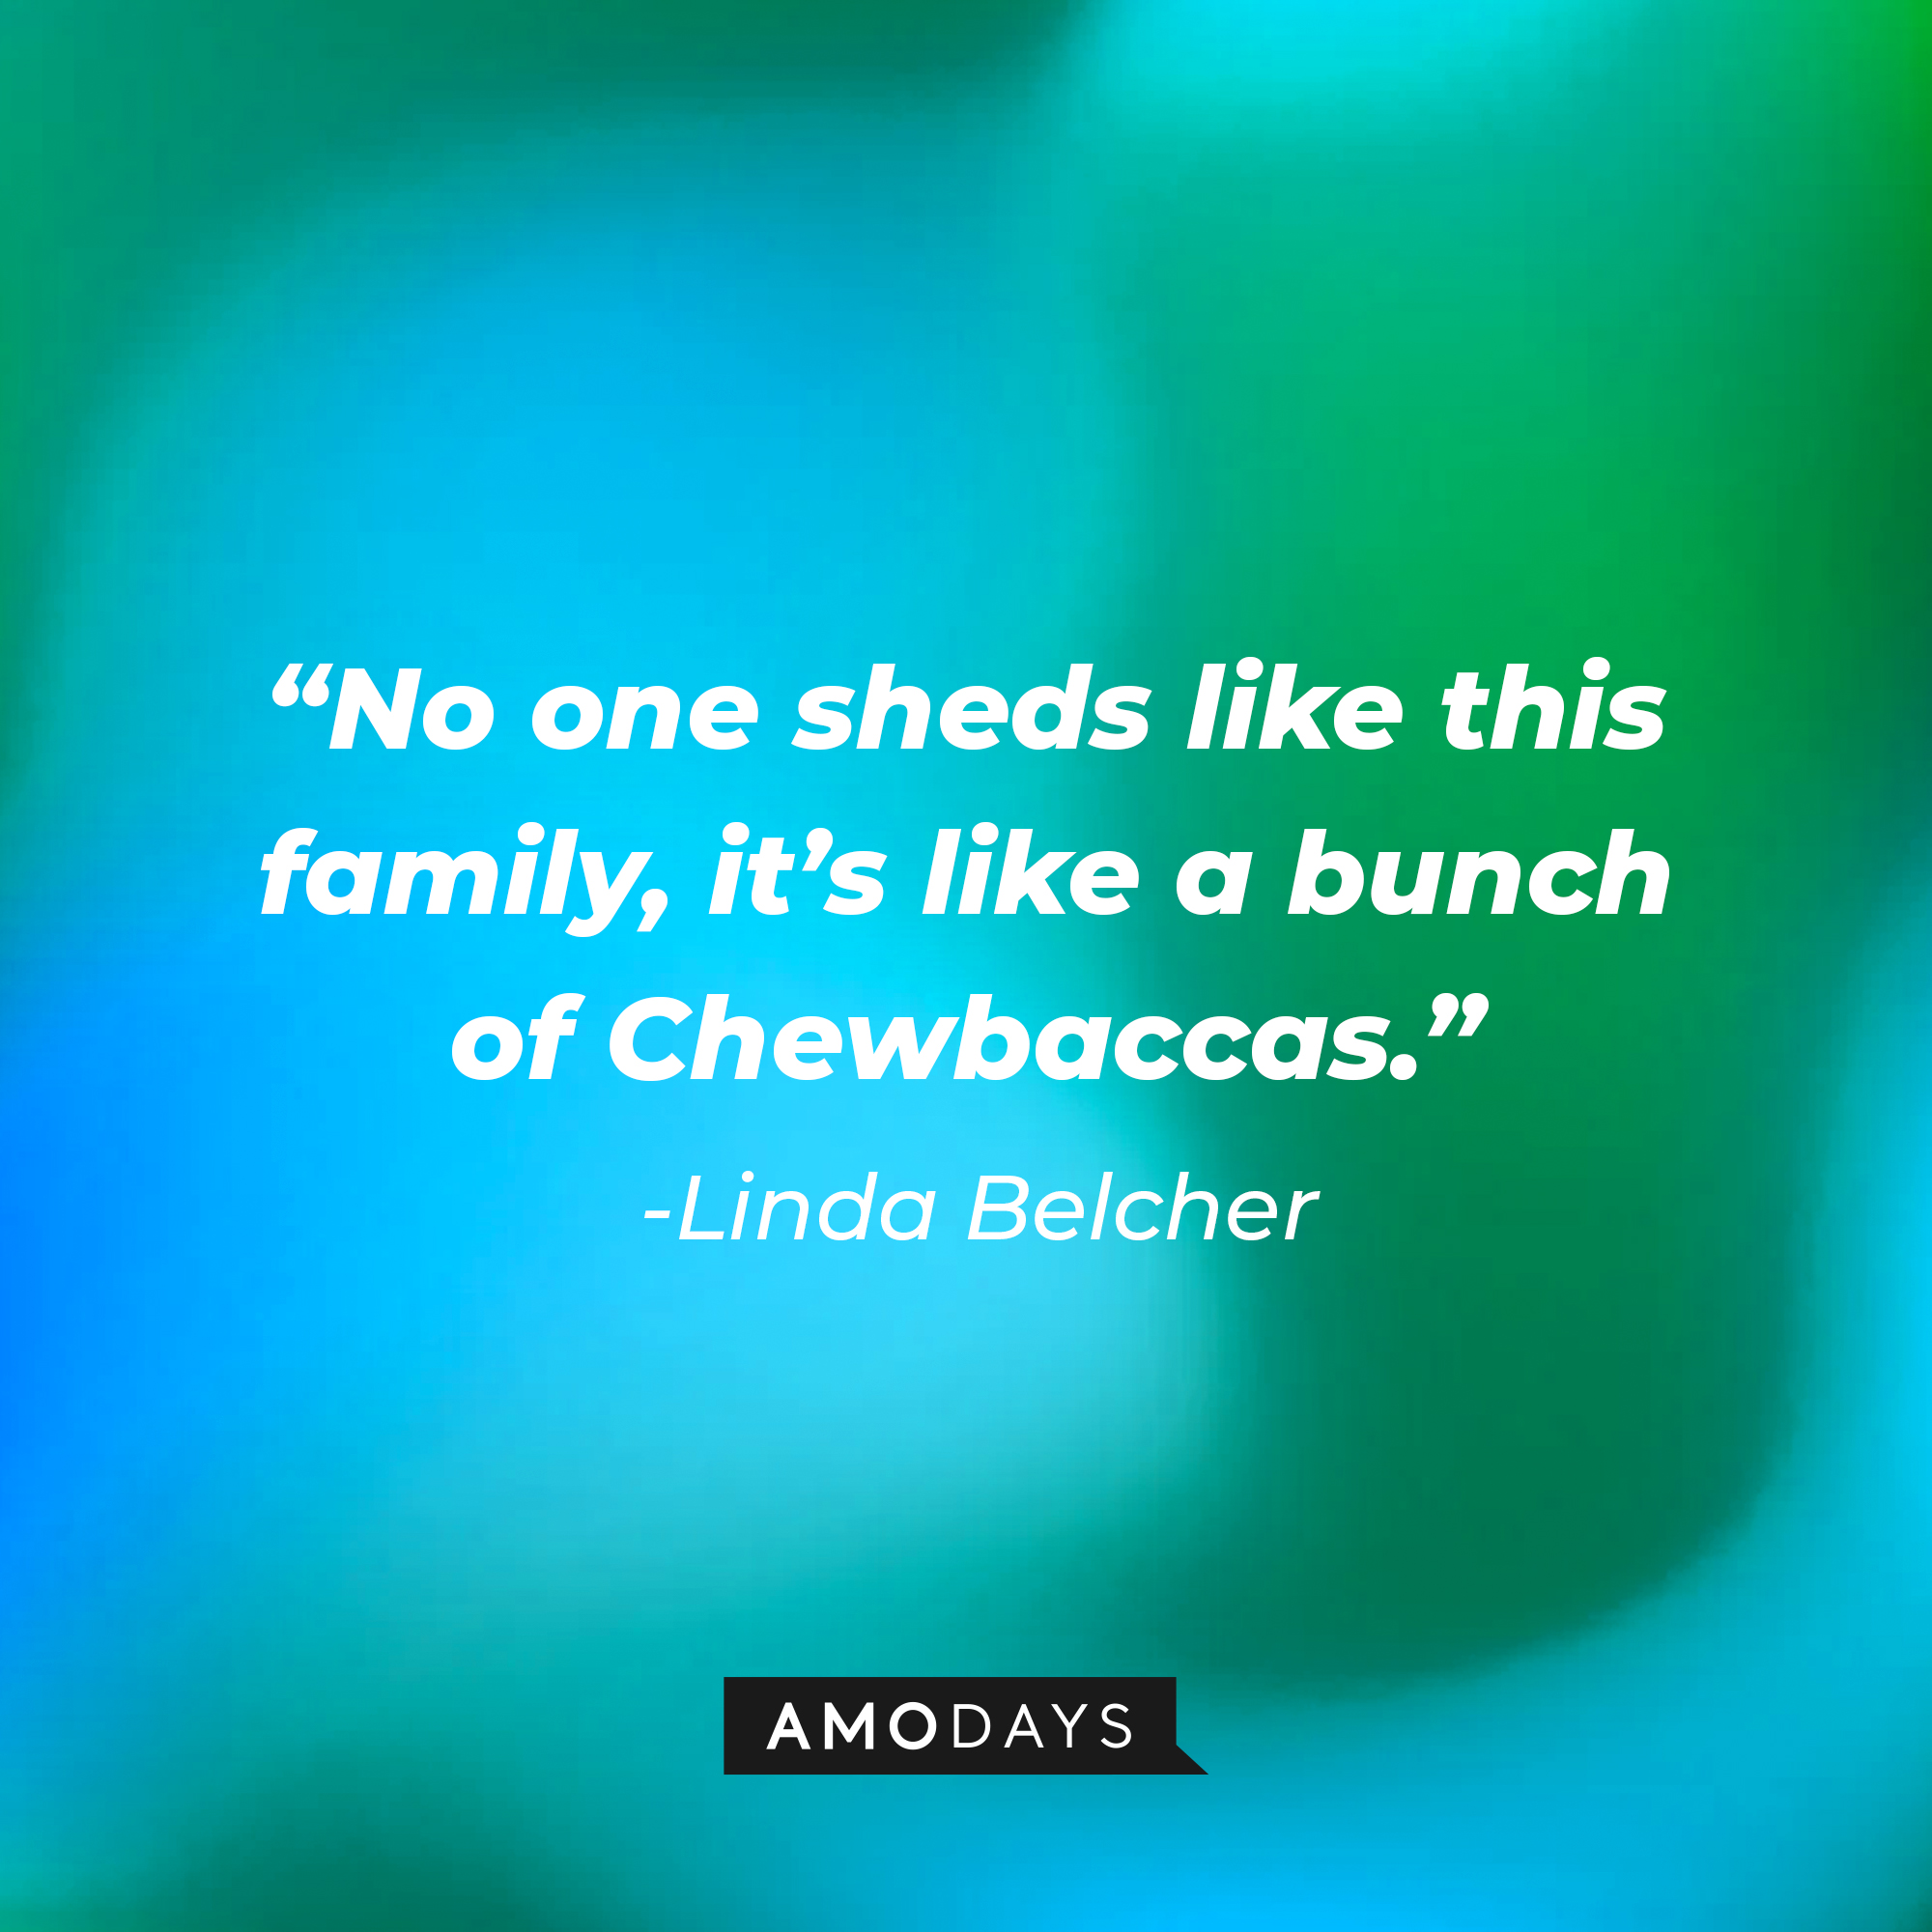 Linda Belcher’s quote: “No one sheds like this family, it’s like a bunch of Chewbaccas.” | Source: AmoDays